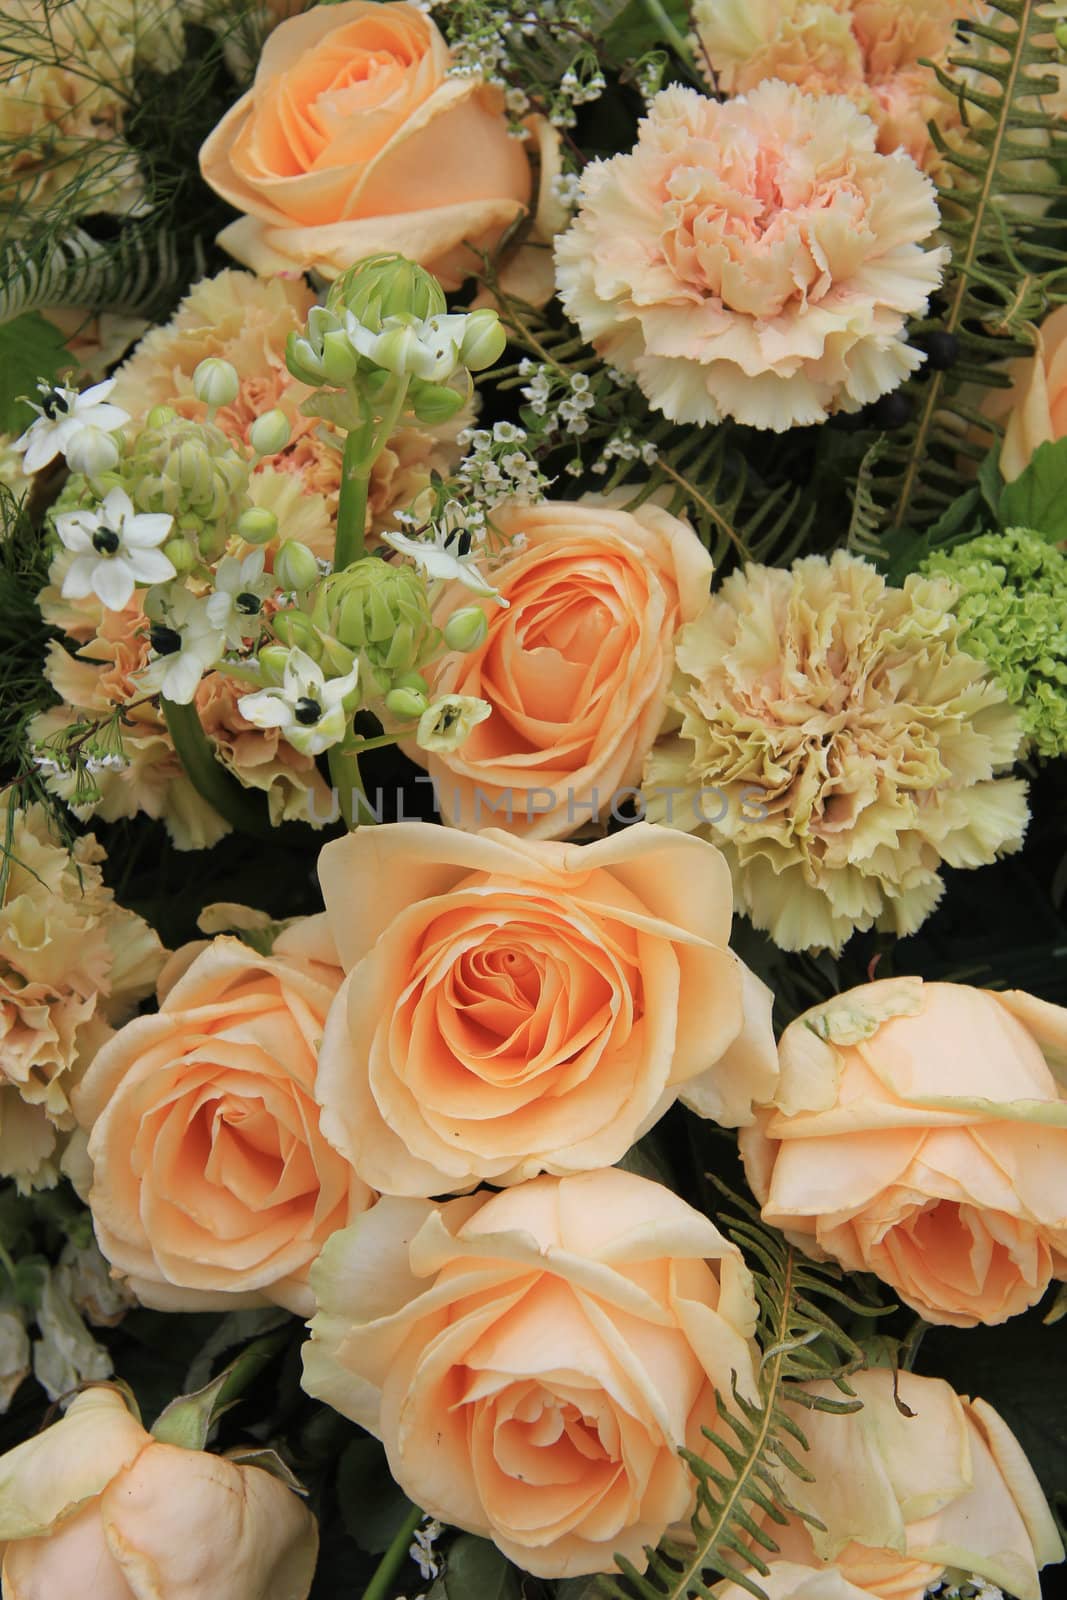 Carnations and roses in a pale orange shade, floral composition